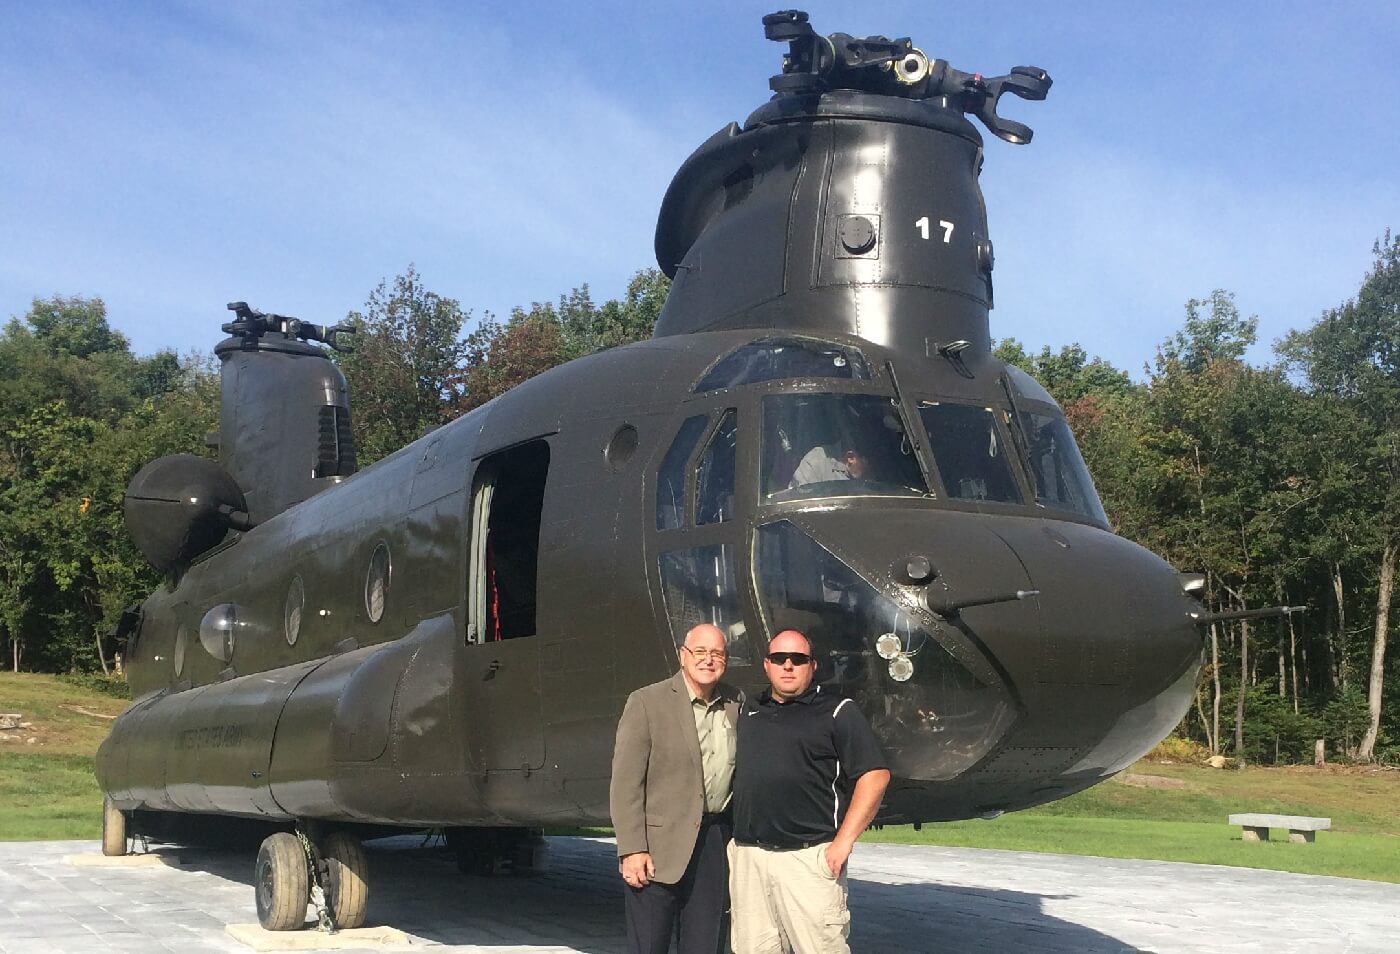 Glenn Wargo, left, an H.W. Farren employee, represented Columbia Helicopters at the opening of the memorial in September 2016. Glenn Wargo Photo